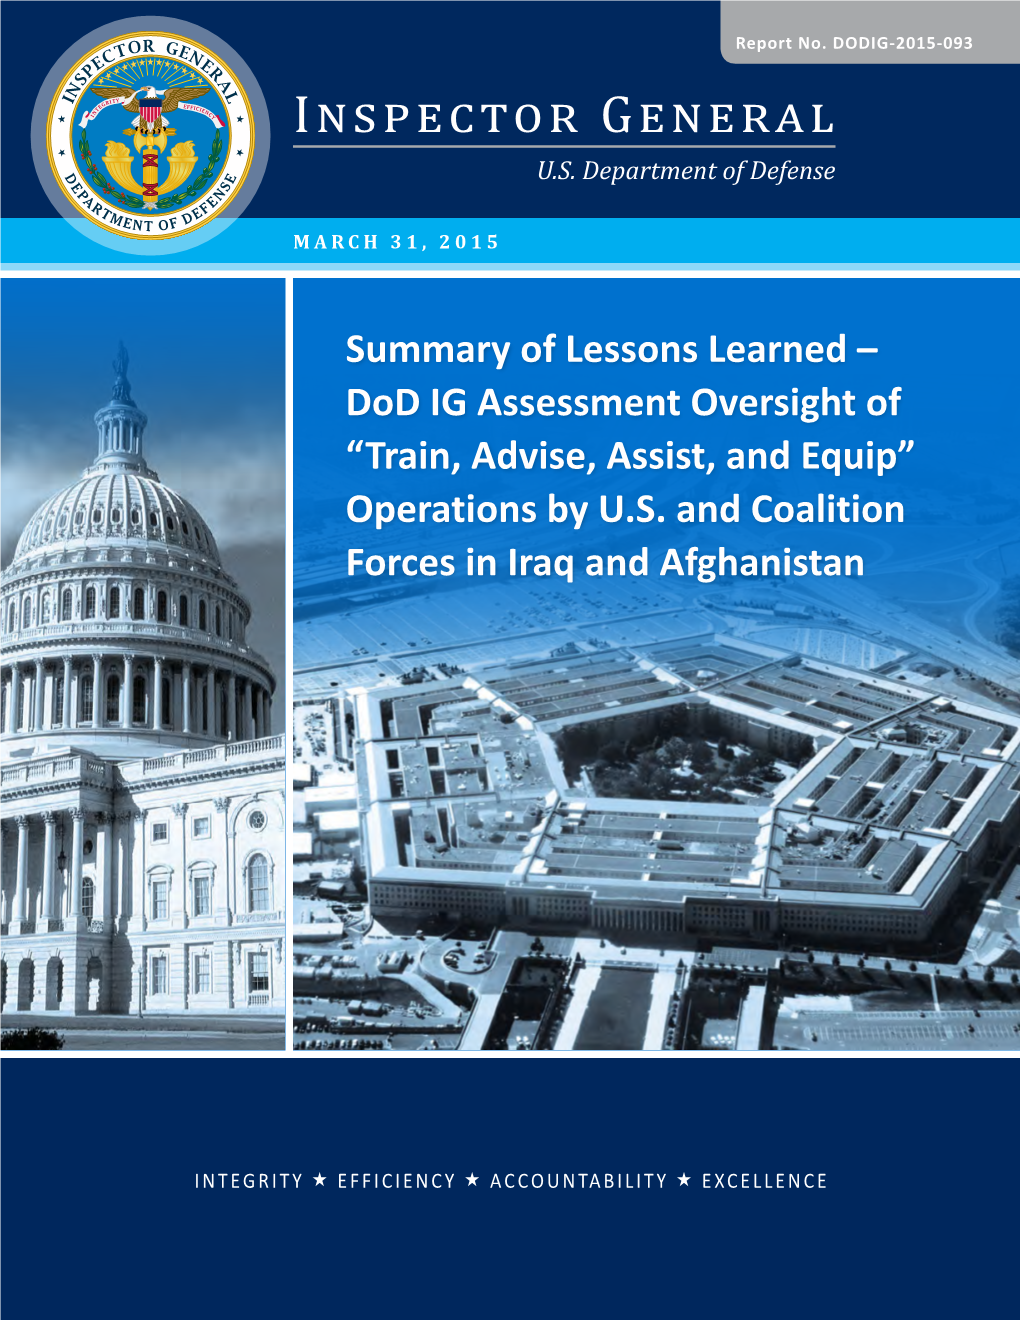 Dod IG Assessment Oversight of “Train, Advise, Assist, and Equip” Operations by U.S